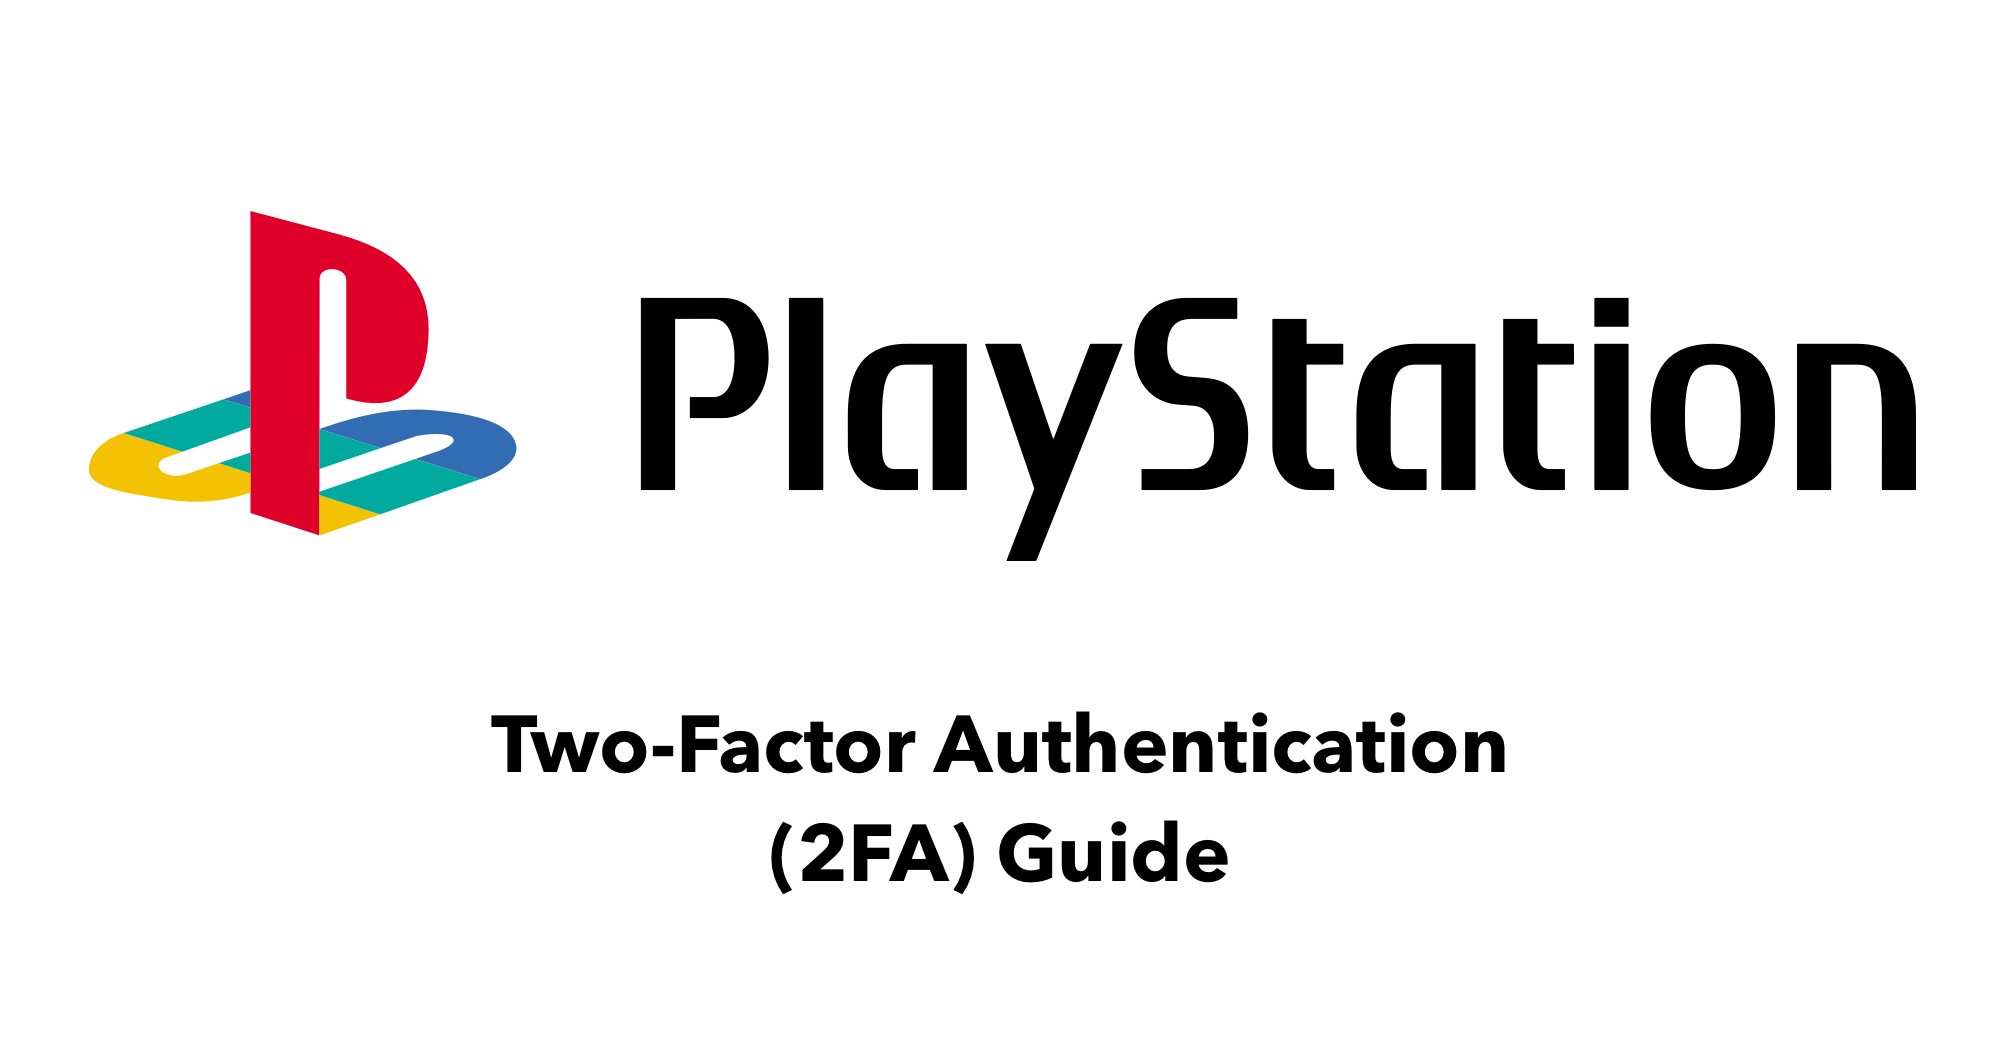 If you're using a PSN account, here's how to enable double-factor